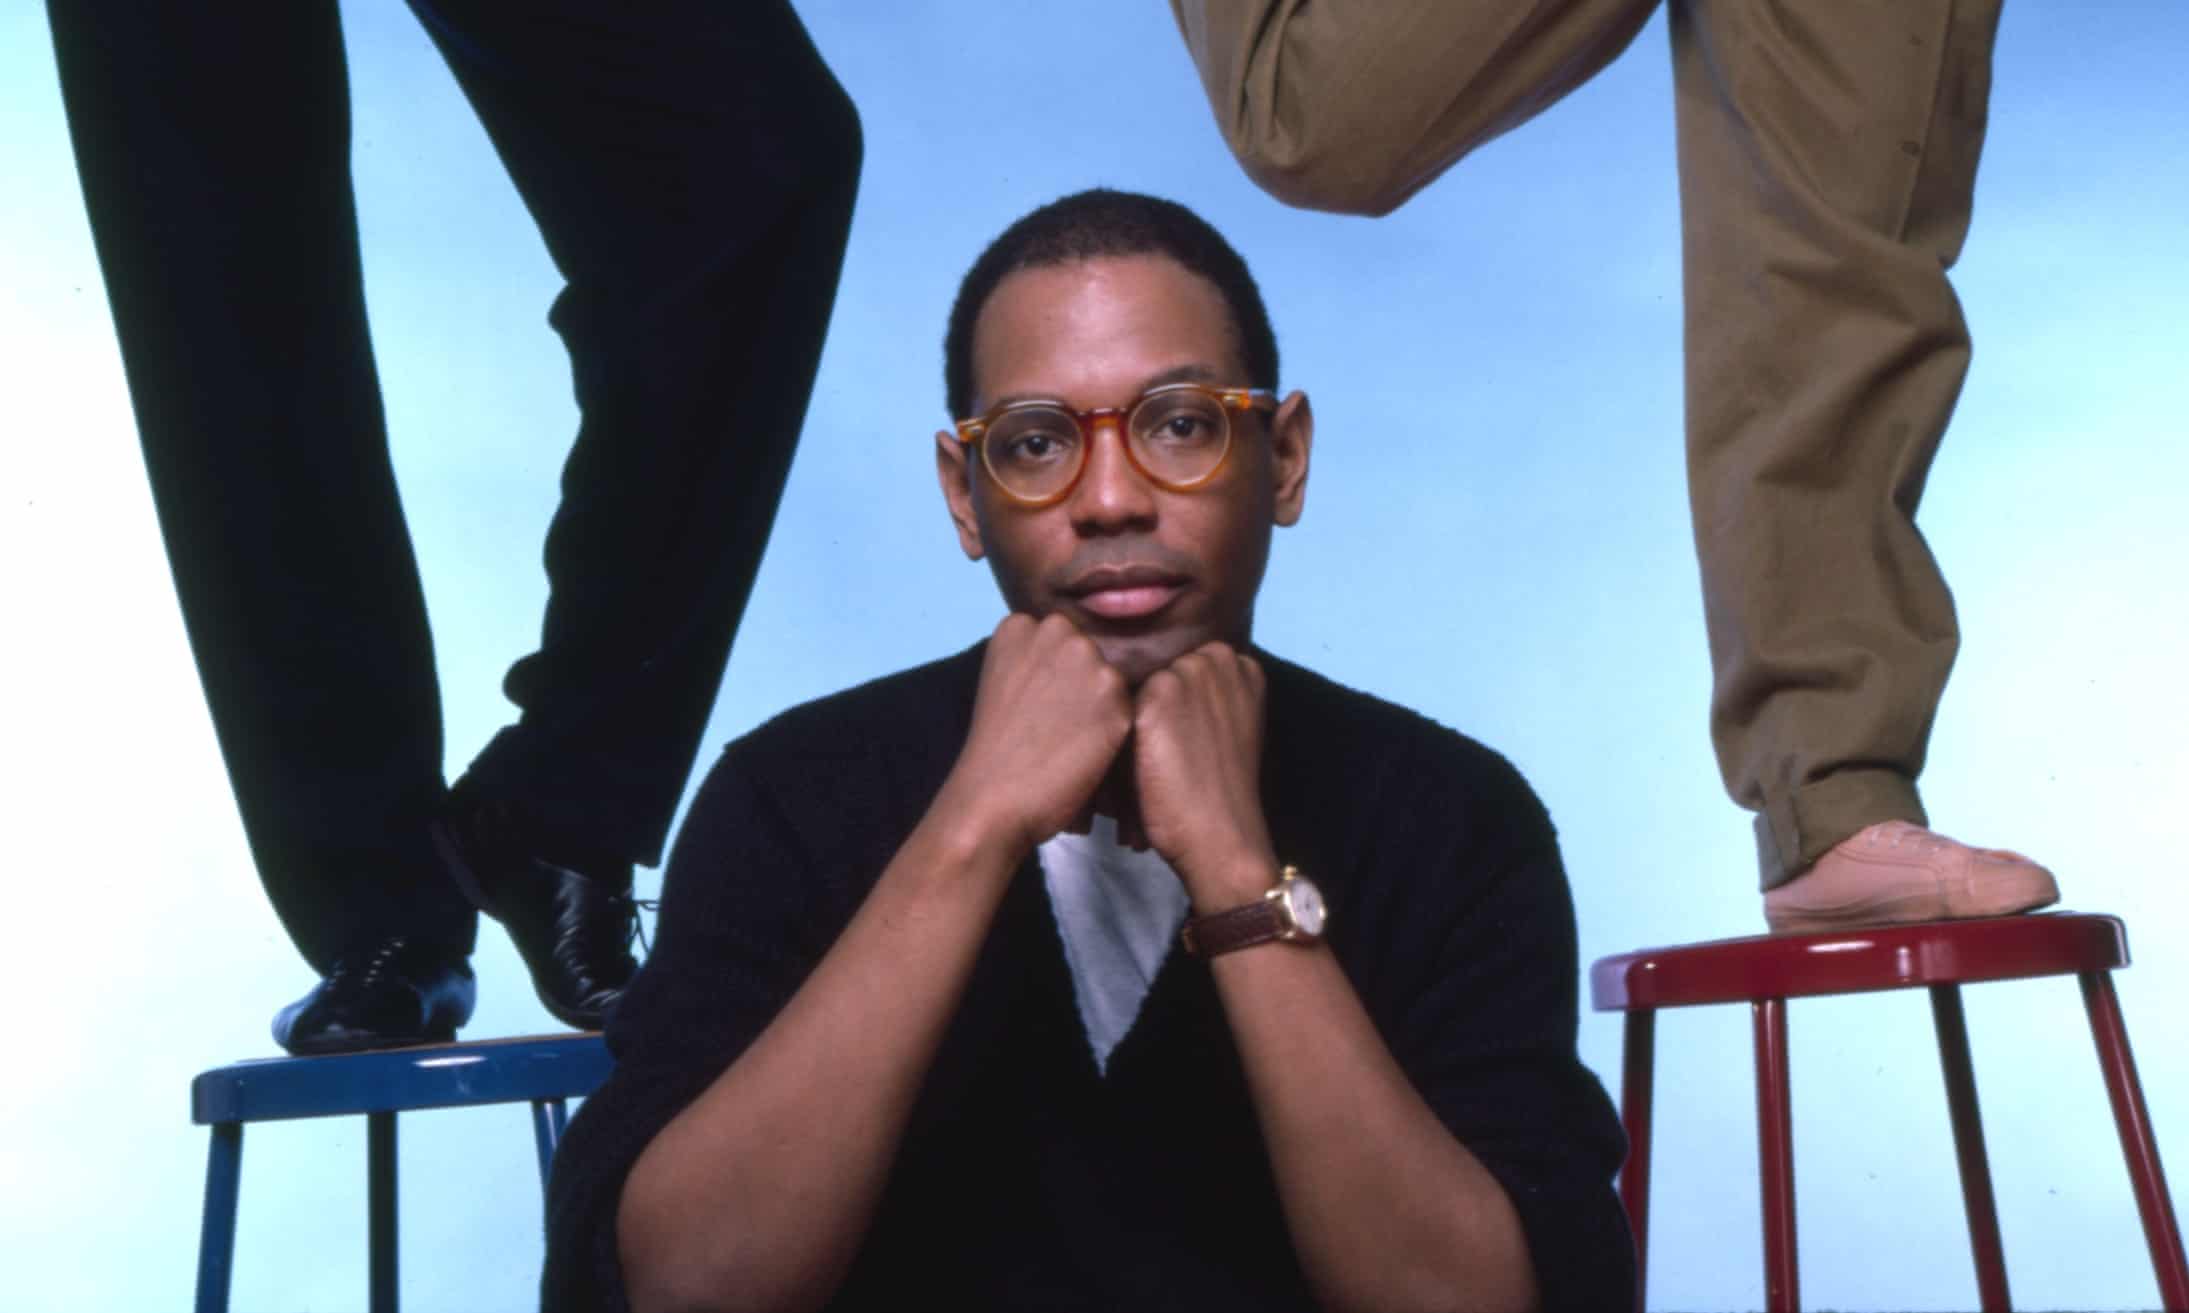 Remembering Willi Smith